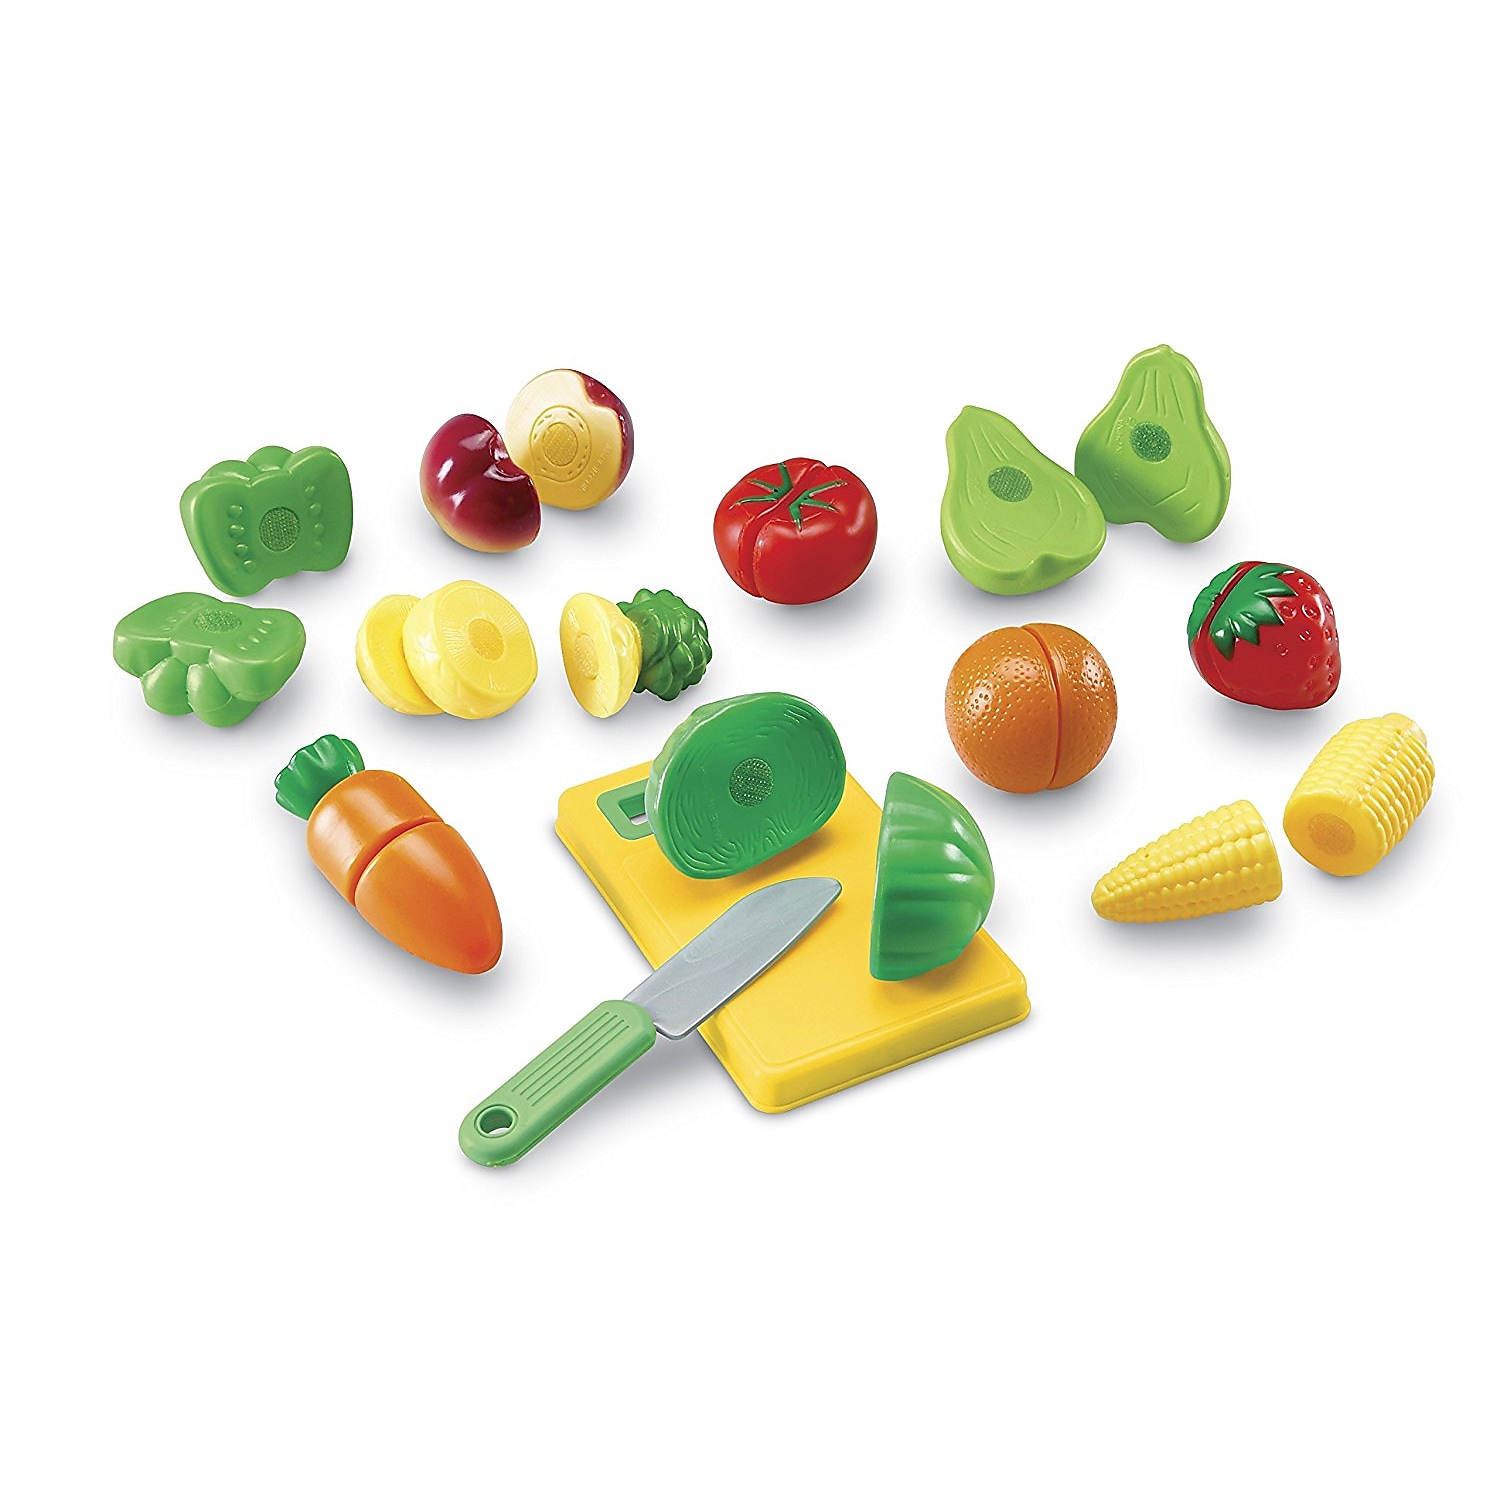 Learning Resources Pretend & Play Sliceable Fruits & Veggies - 23 Pieces, Boys and Girls Ages 3+, Food Play Set, Pretend Food For Toddlers - image 3 of 3